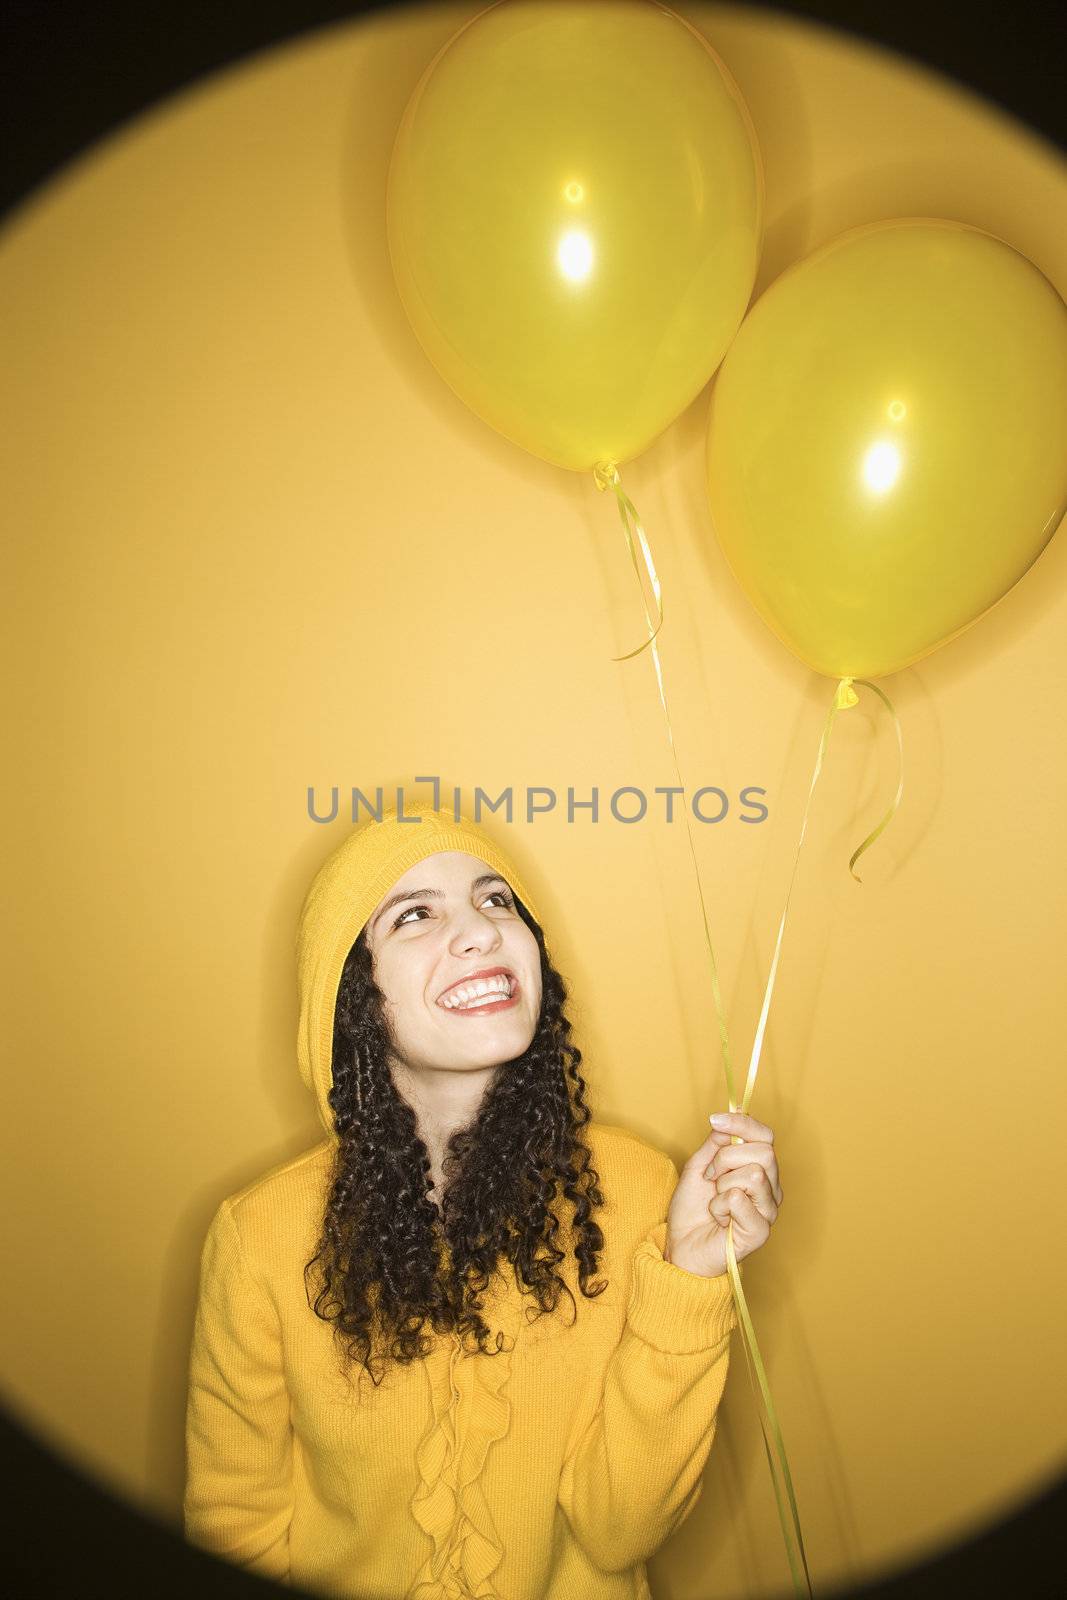 Smiling young Caucasian woman with balloons wearing yellow raincoat on yellow background.